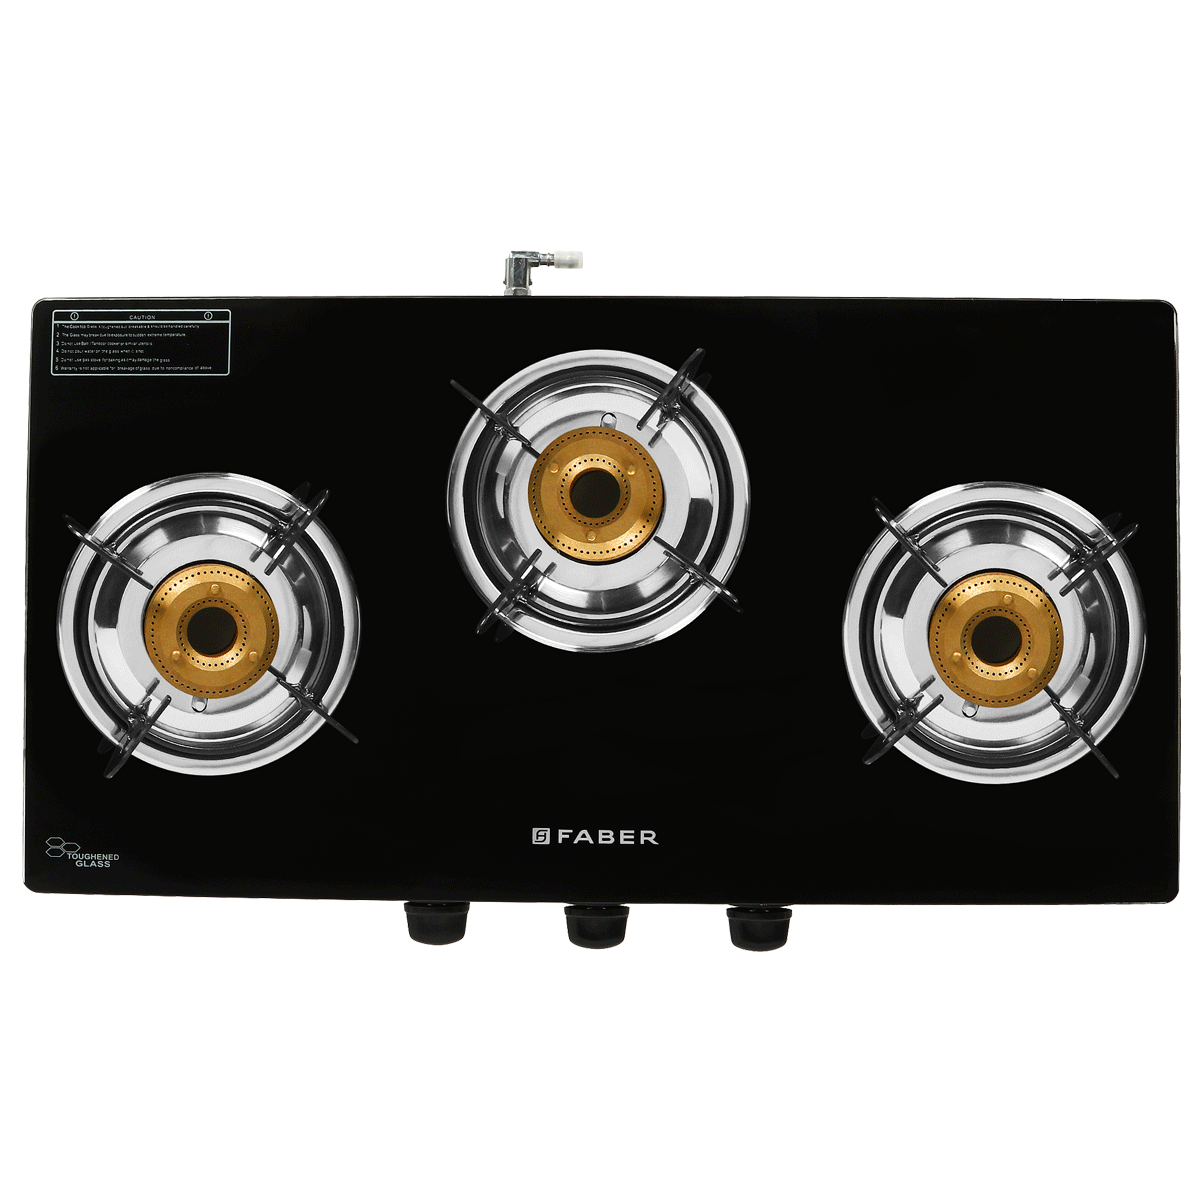 Faber - Faber Power 3BB 3 Burner Toughened Glass Gas Stove (Powder Coating Round Pan Support, 106.0629.732, Black)